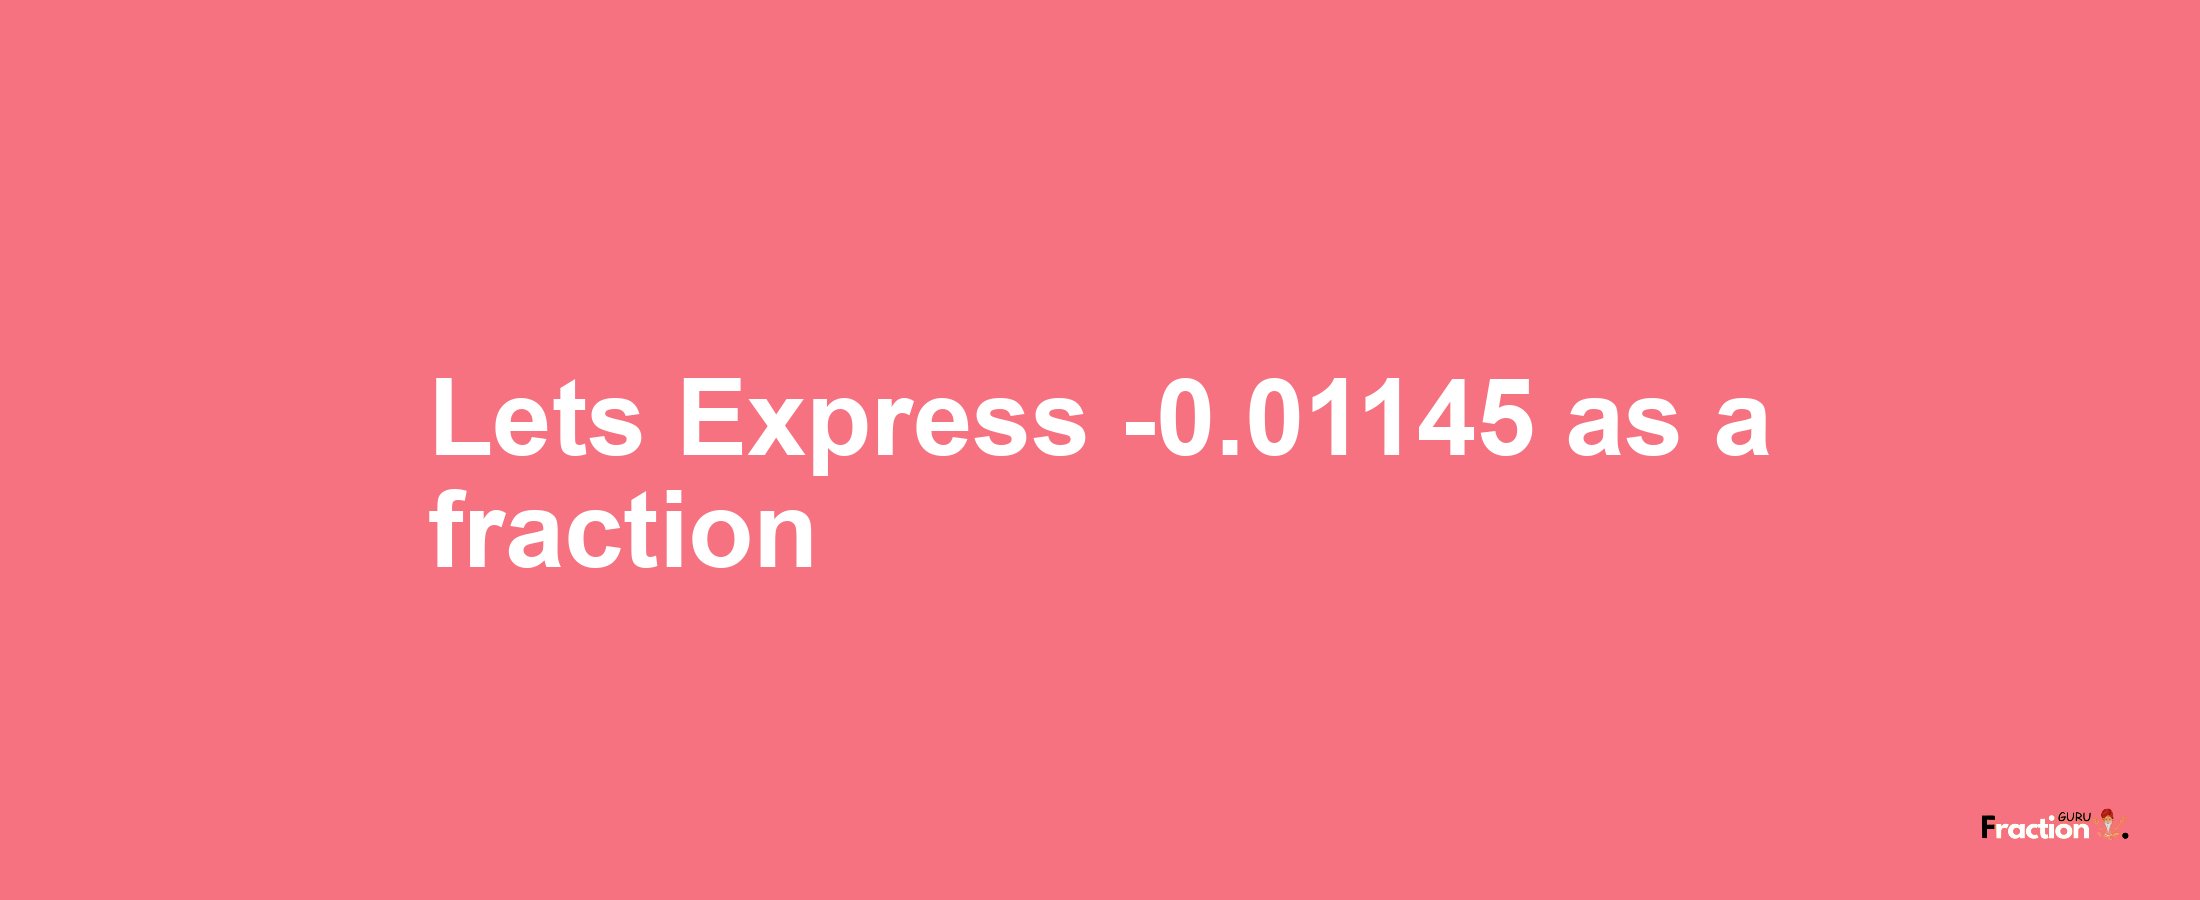 Lets Express -0.01145 as afraction